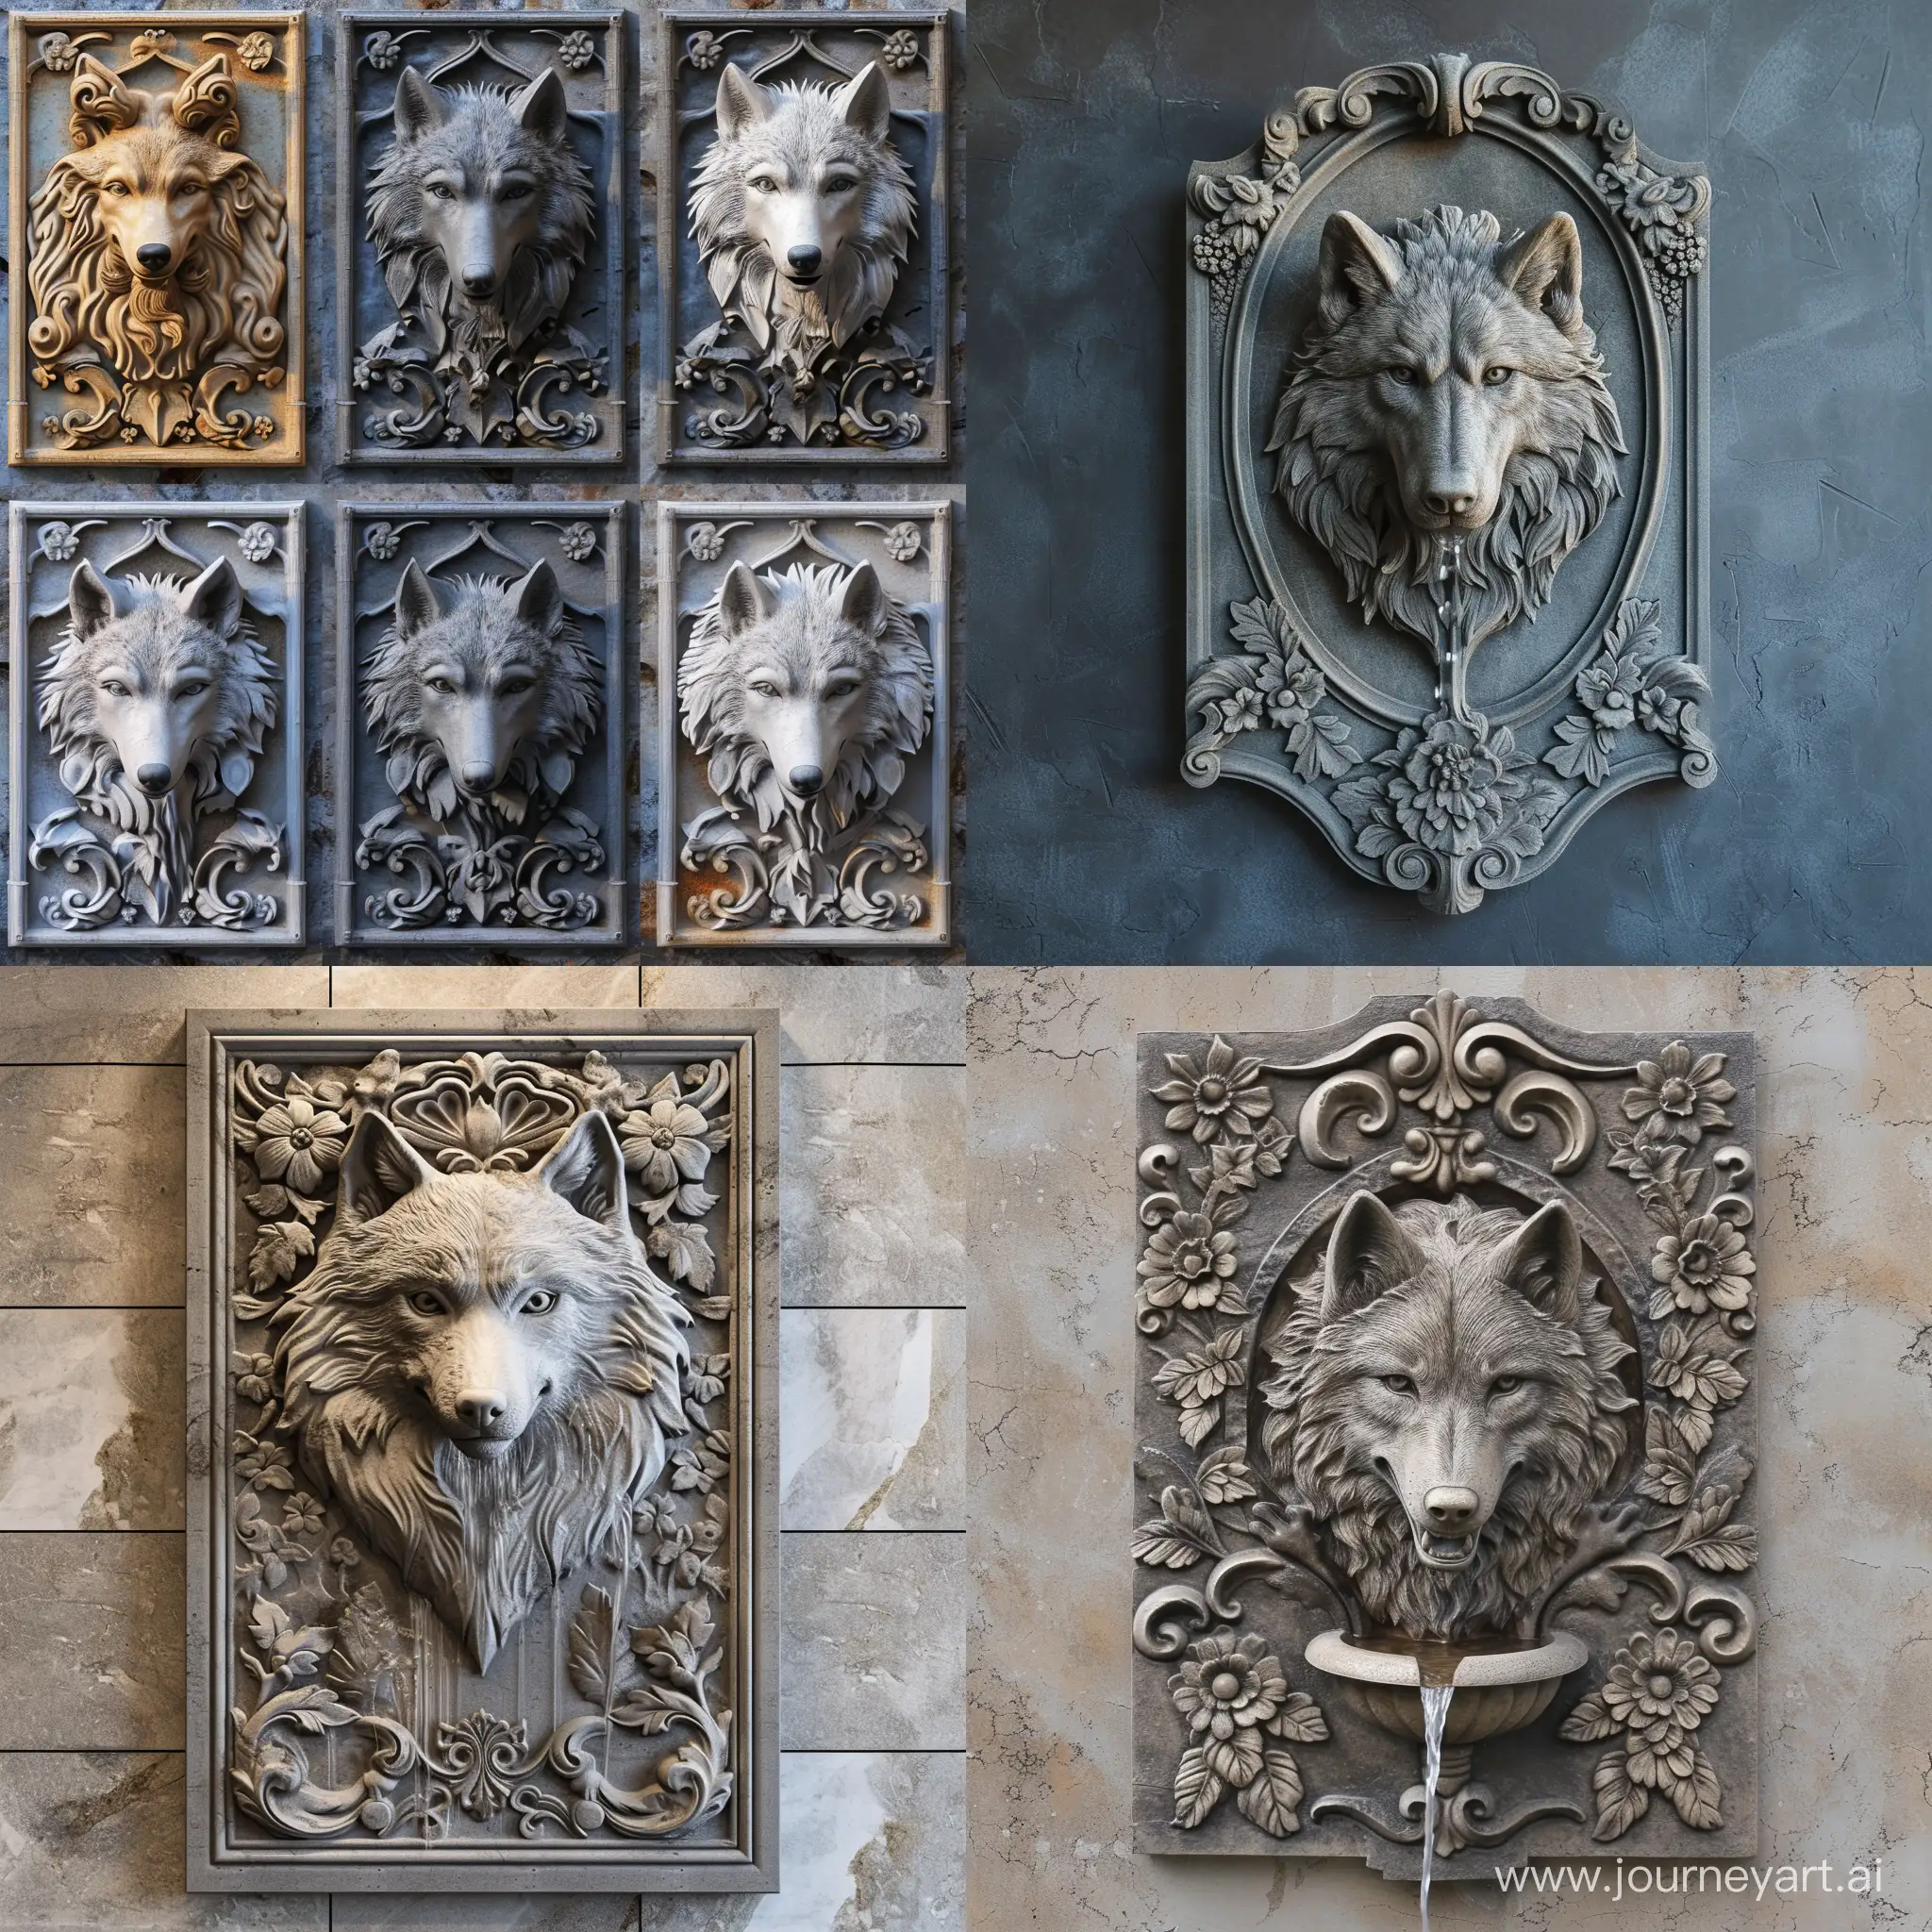 WolfThemed-Baroque-Patterned-Wall-Fountain-Variations